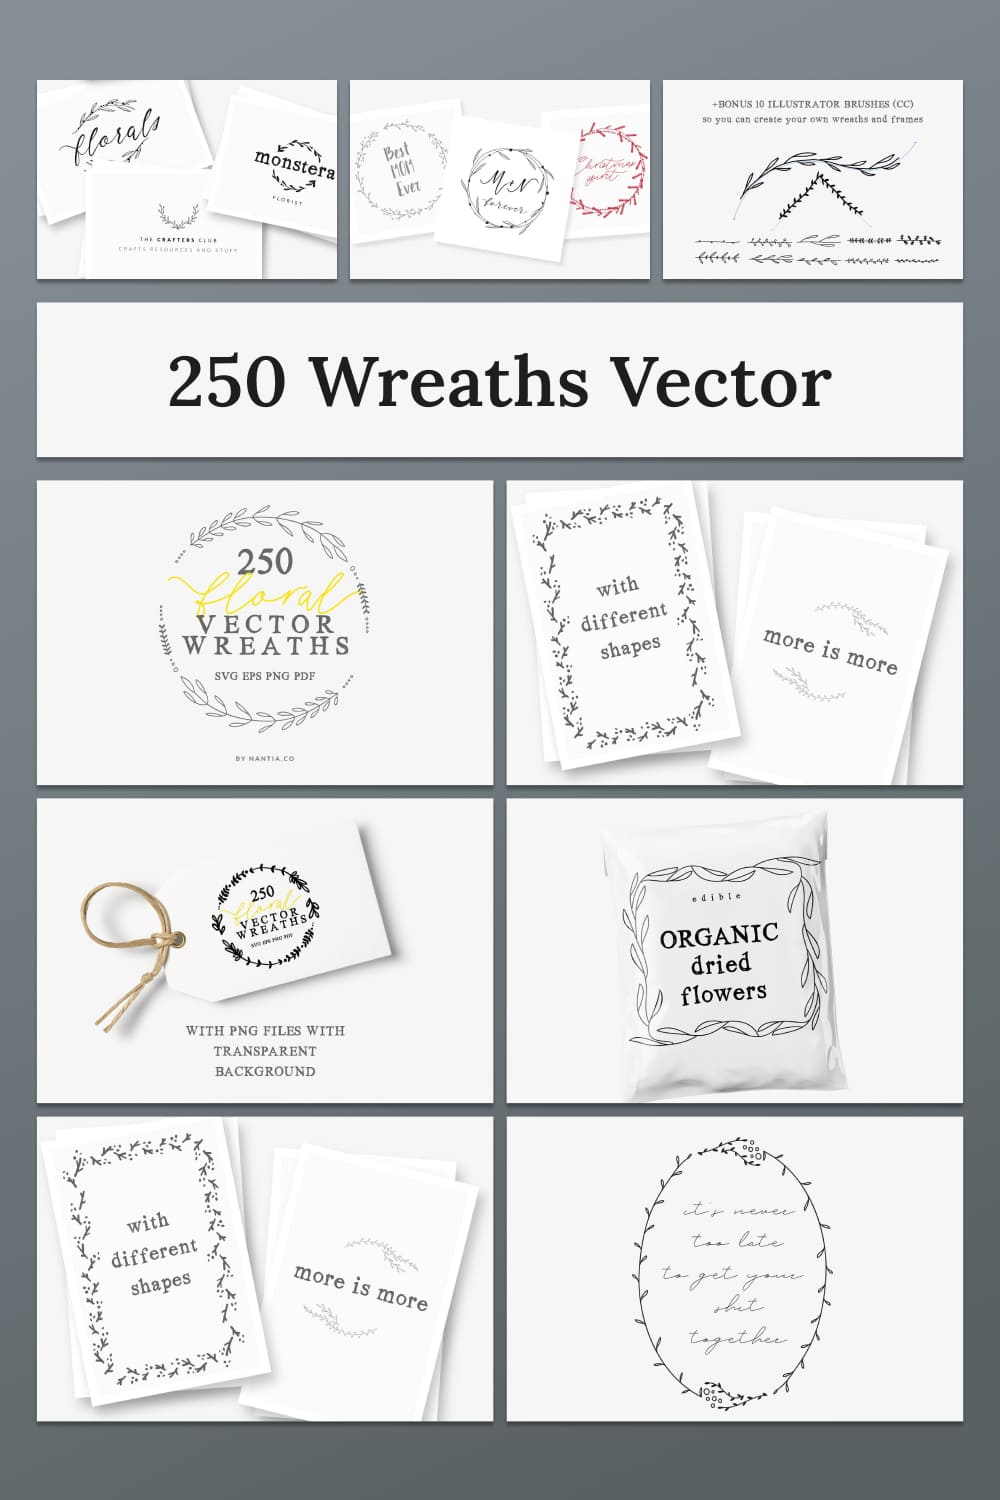 250 wreaths vector with different shapes.